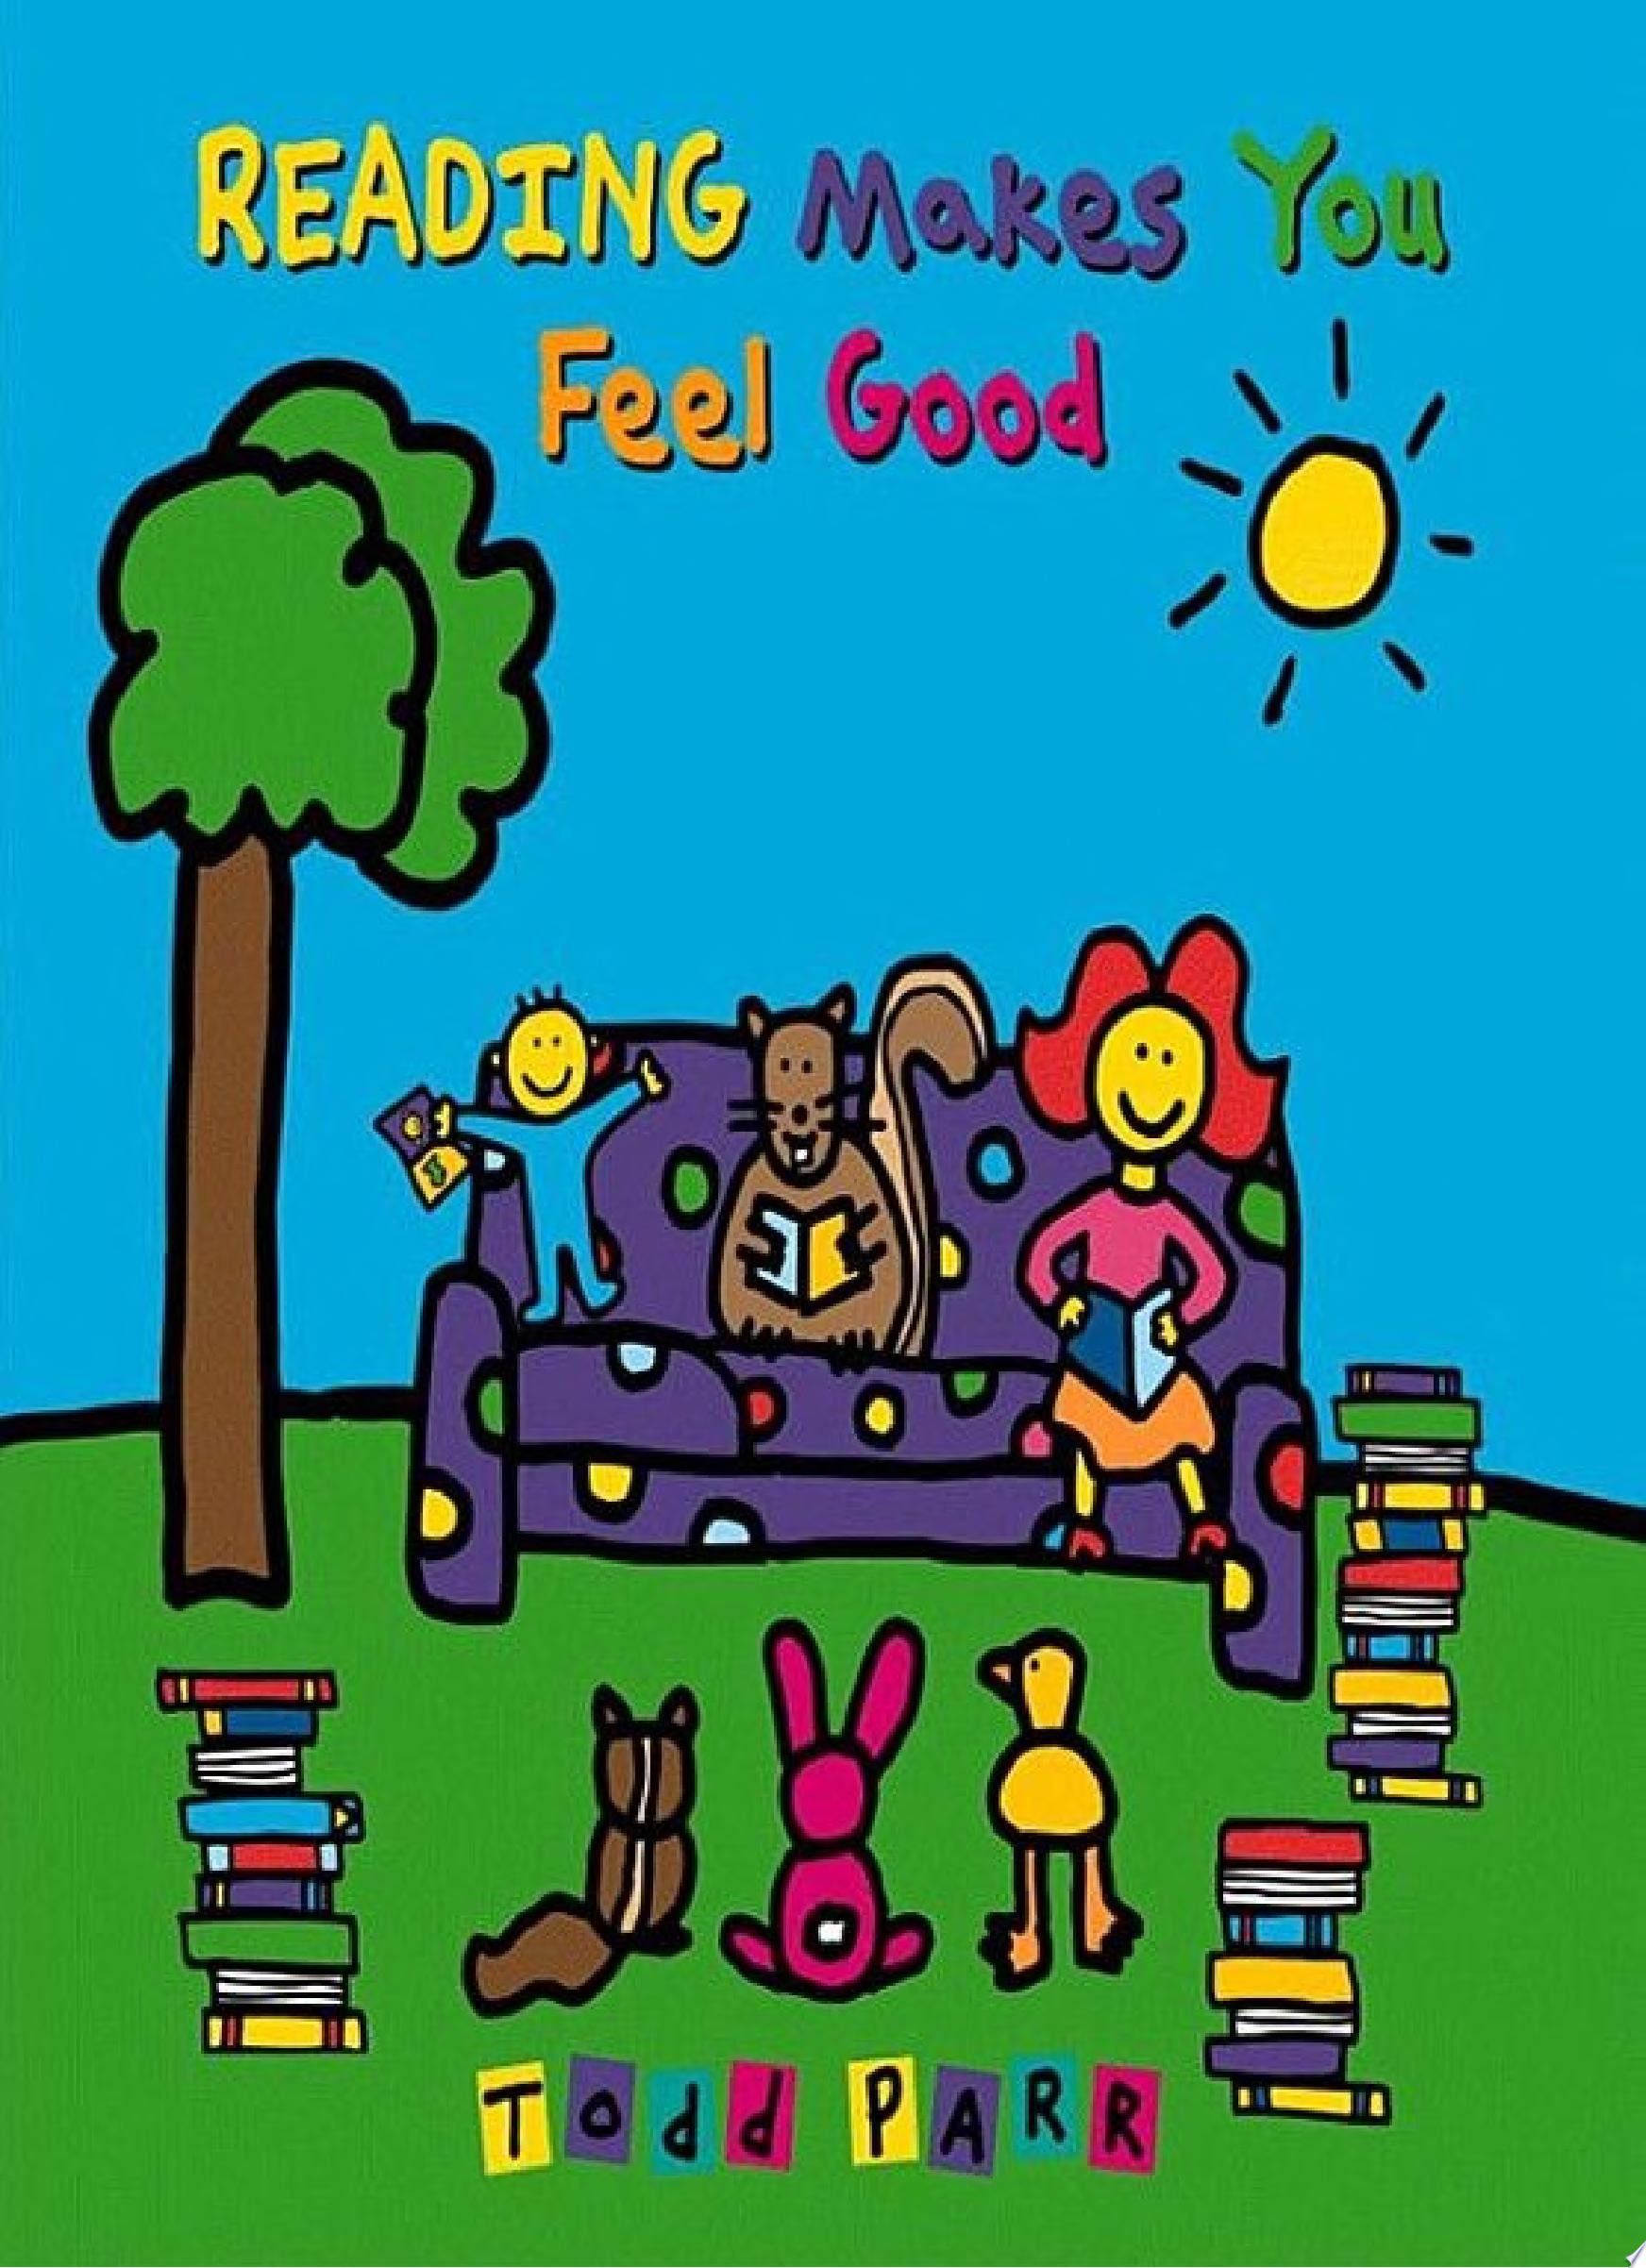 Image for "Reading Makes You Feel Good"